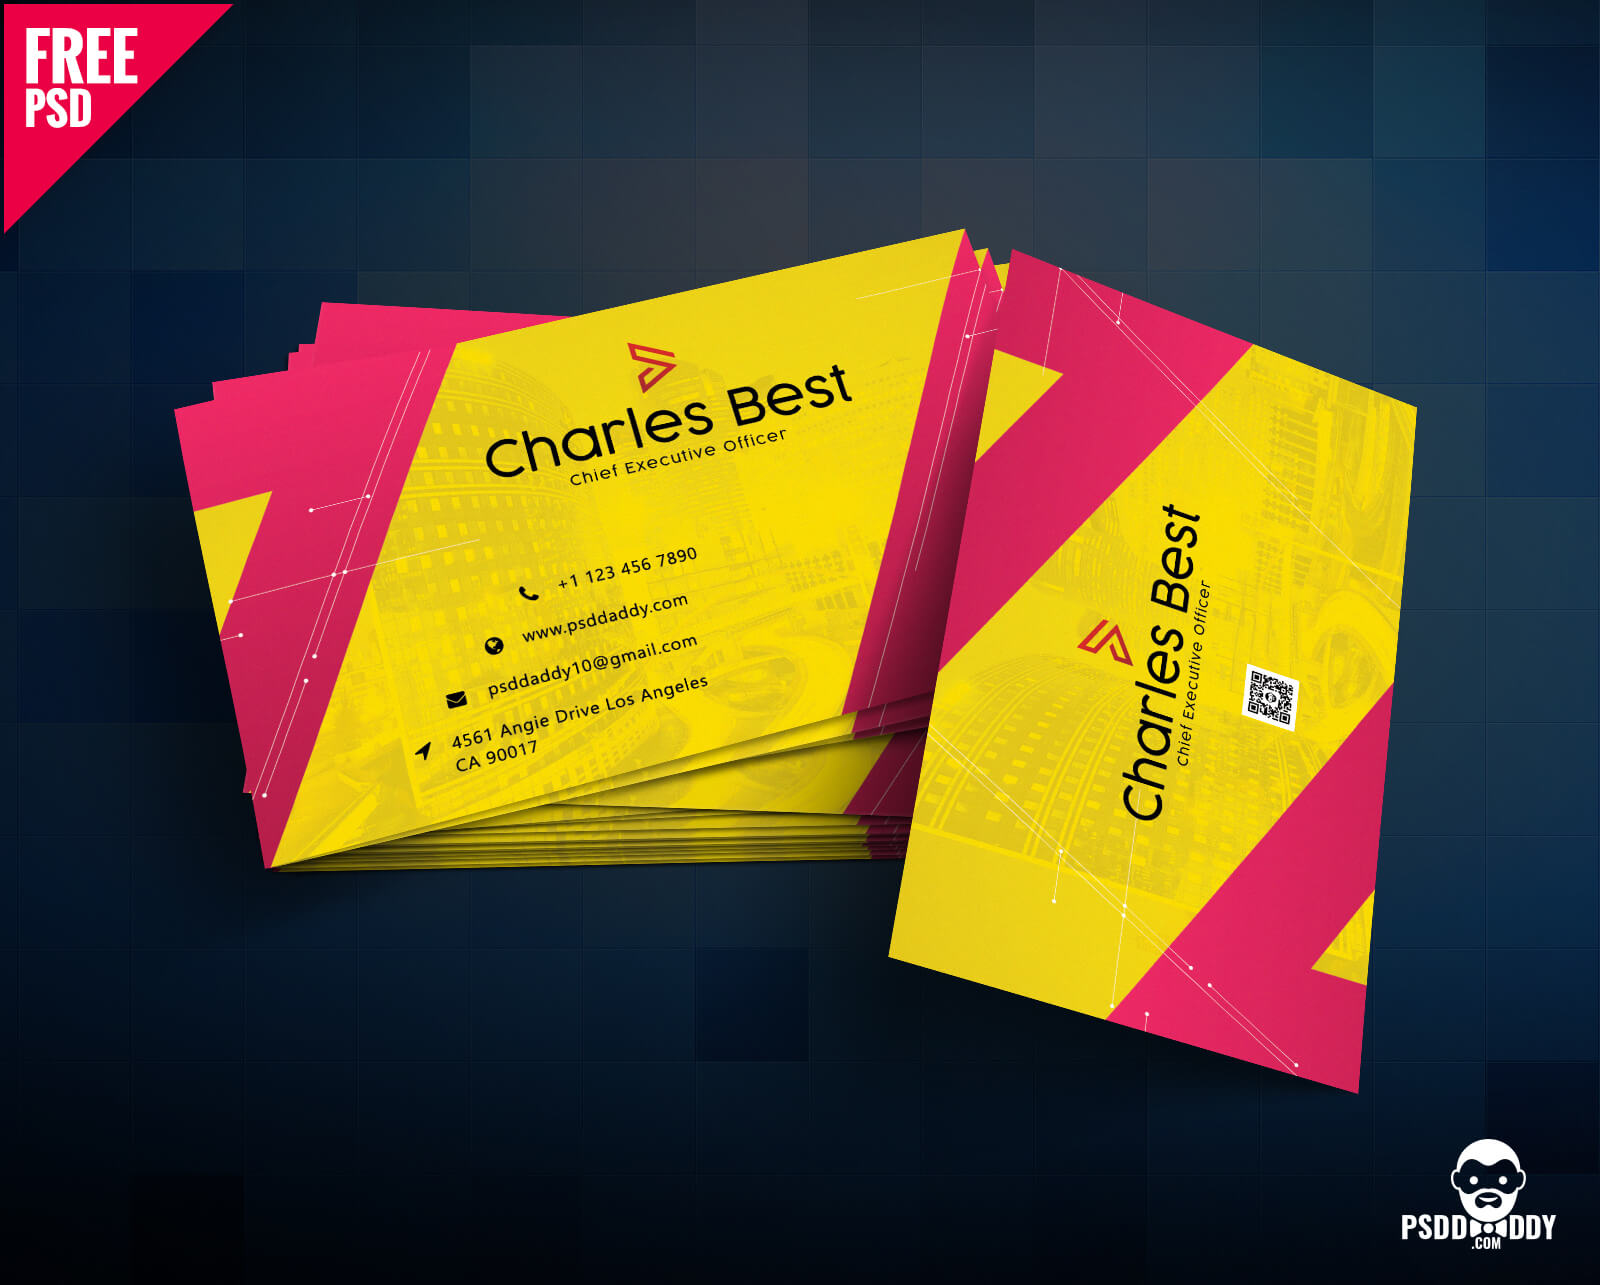 Download] Creative Business Card Free Psd | Psddaddy Intended For Business Card Size Photoshop Template